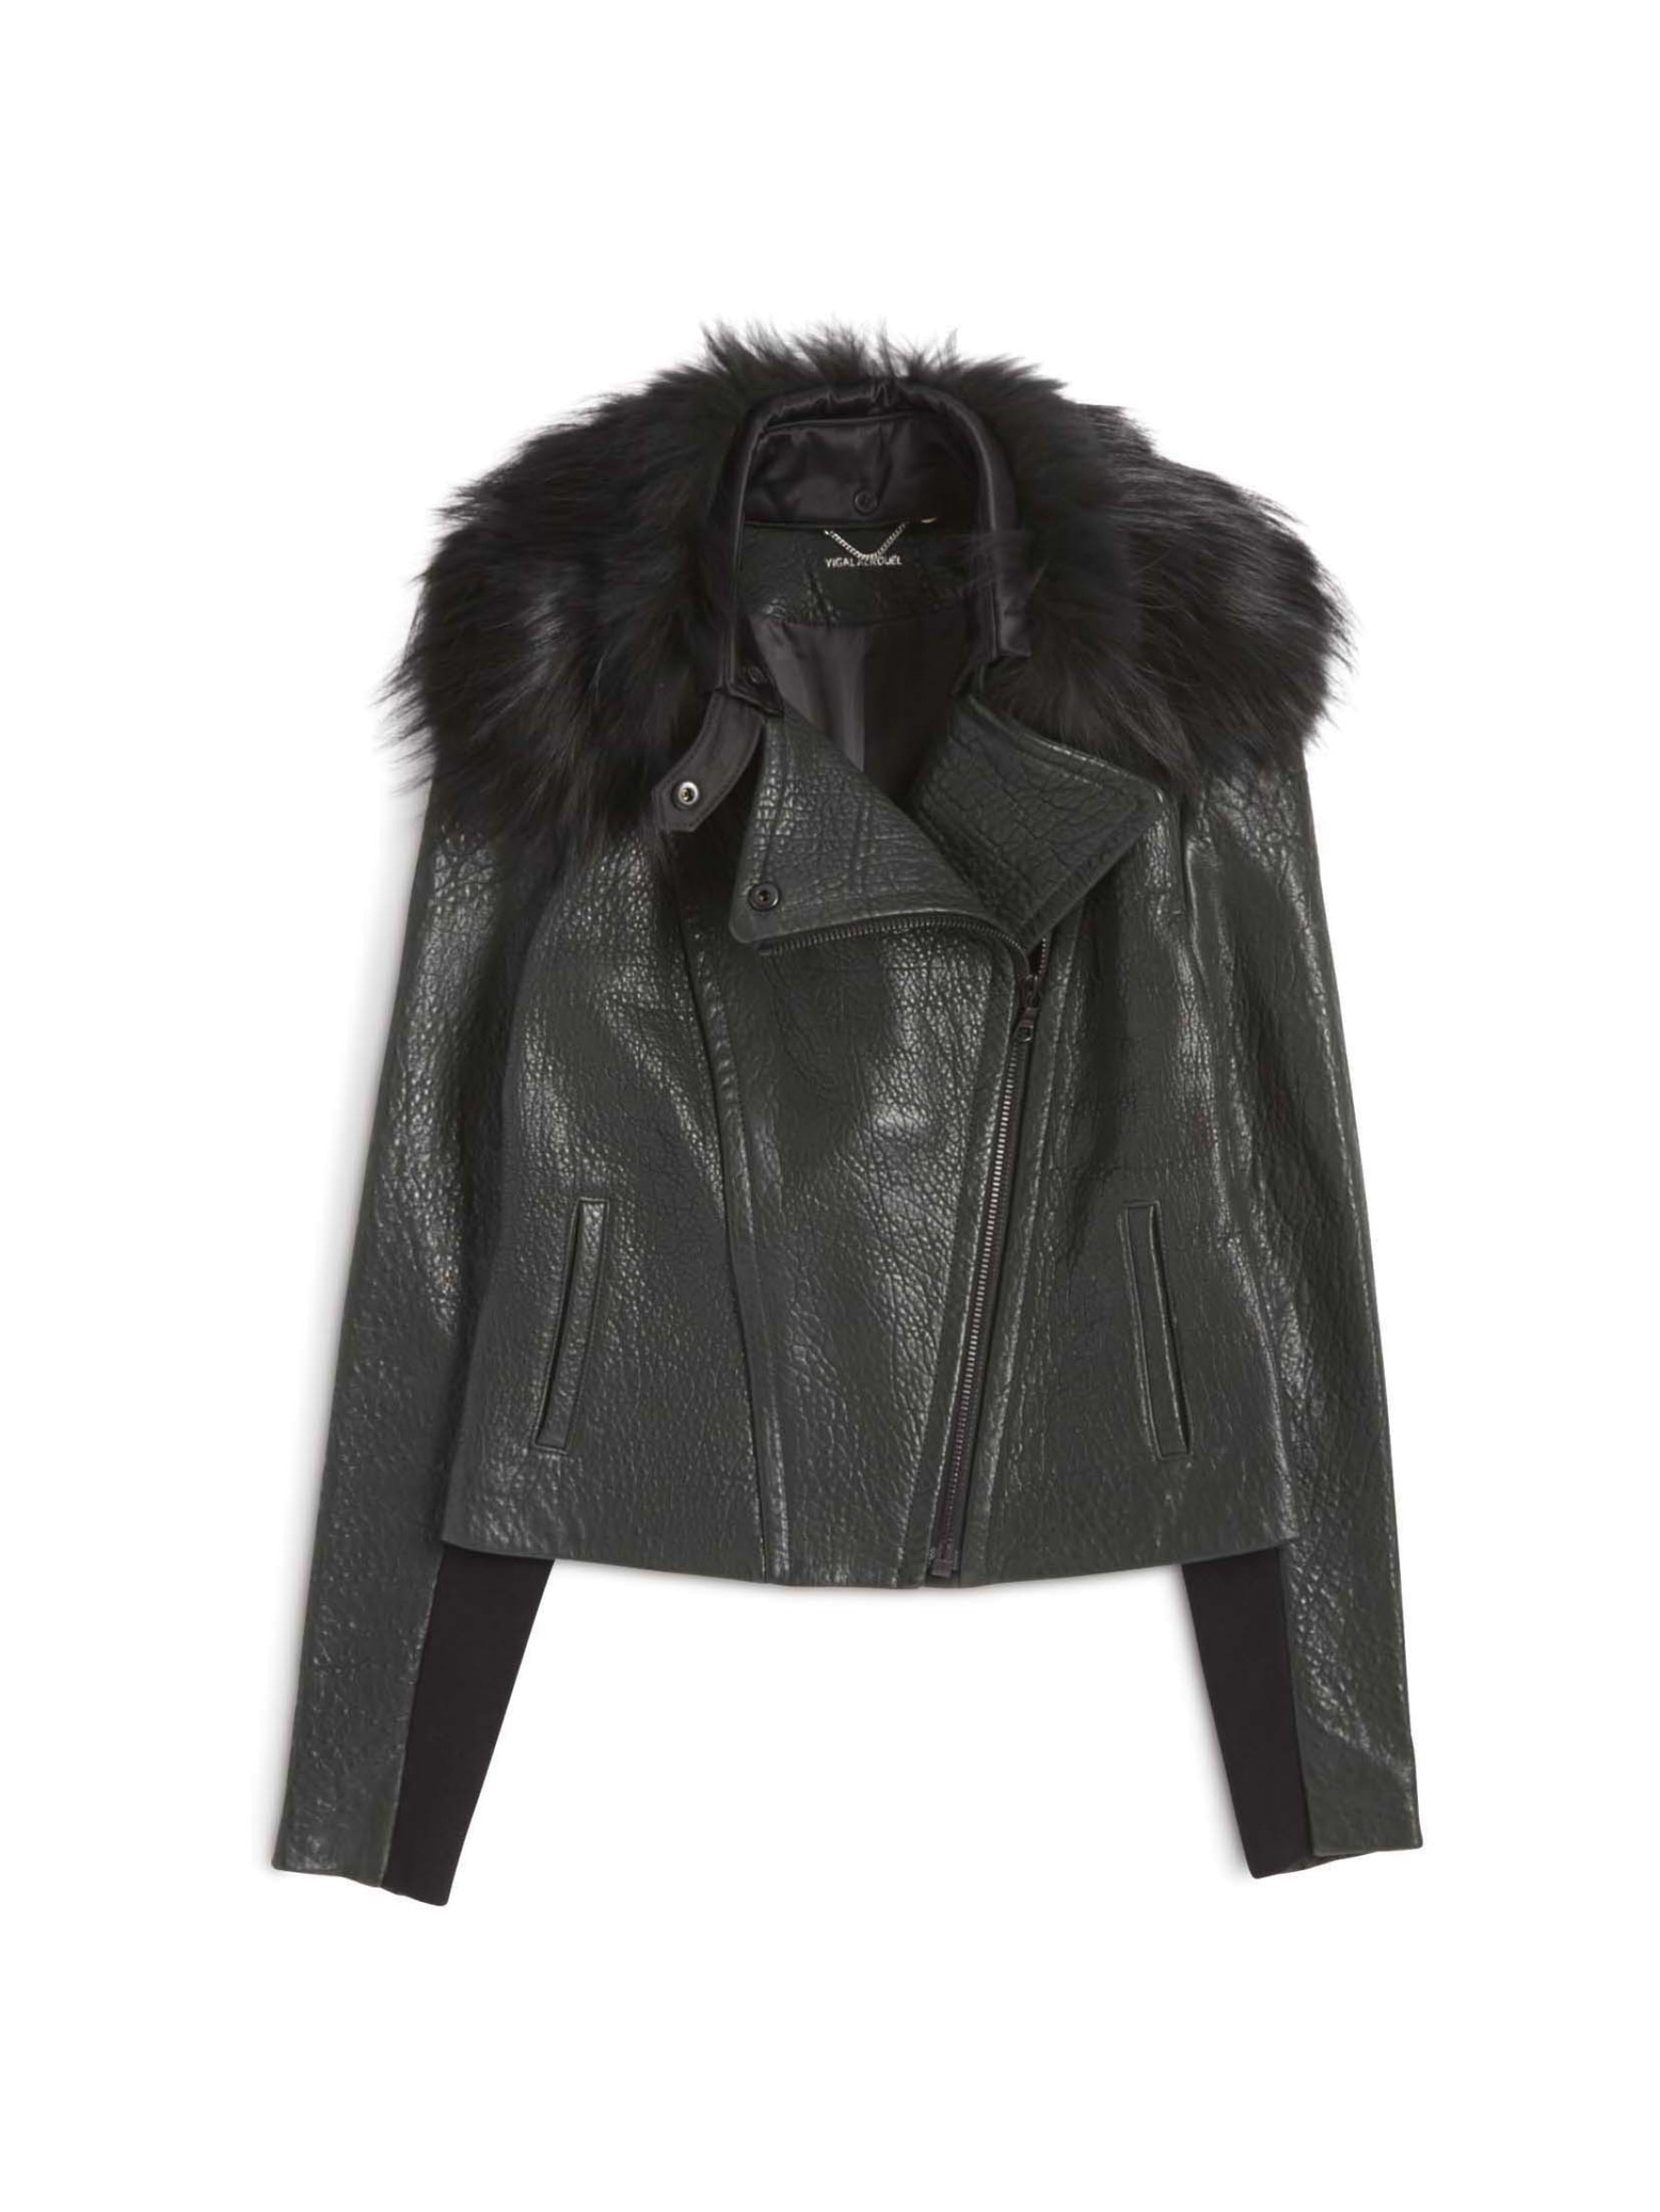 Black Leather Jacket With Fur Collar | Outdoor Jacket